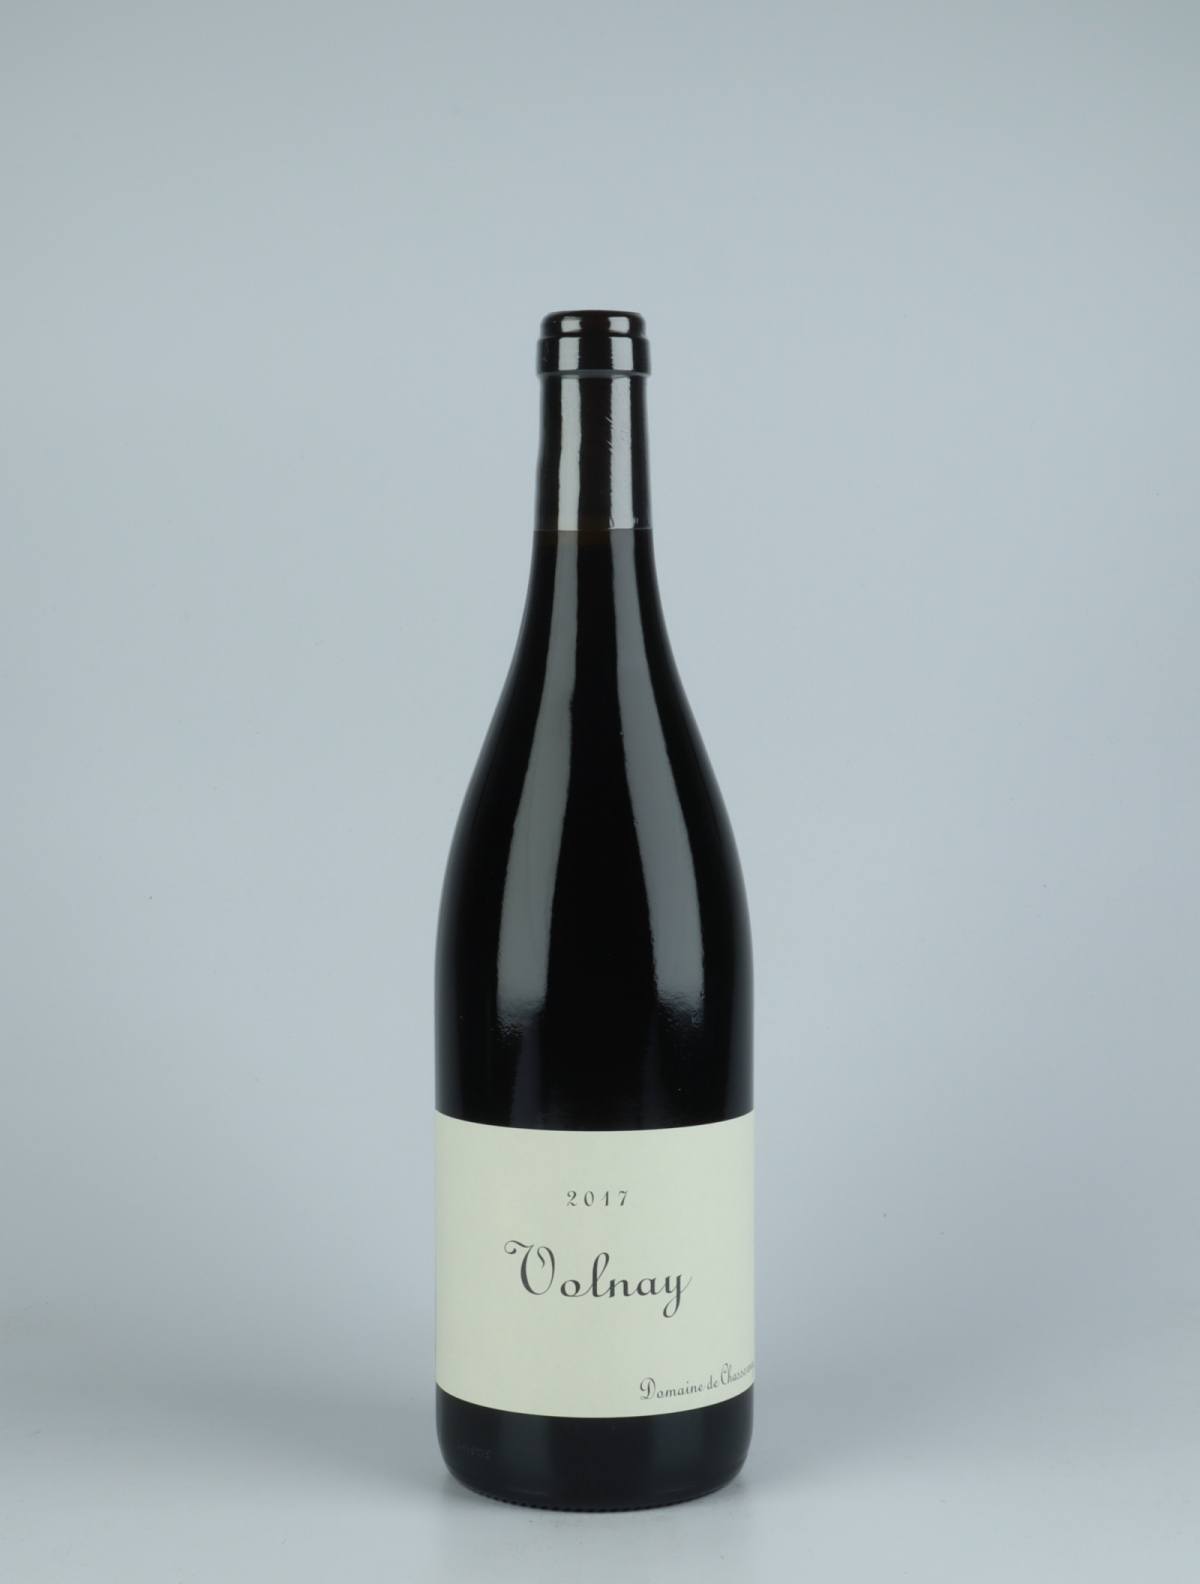 A bottle 2017 Volnay Red wine from Domaine de Chassorney, Burgundy in France